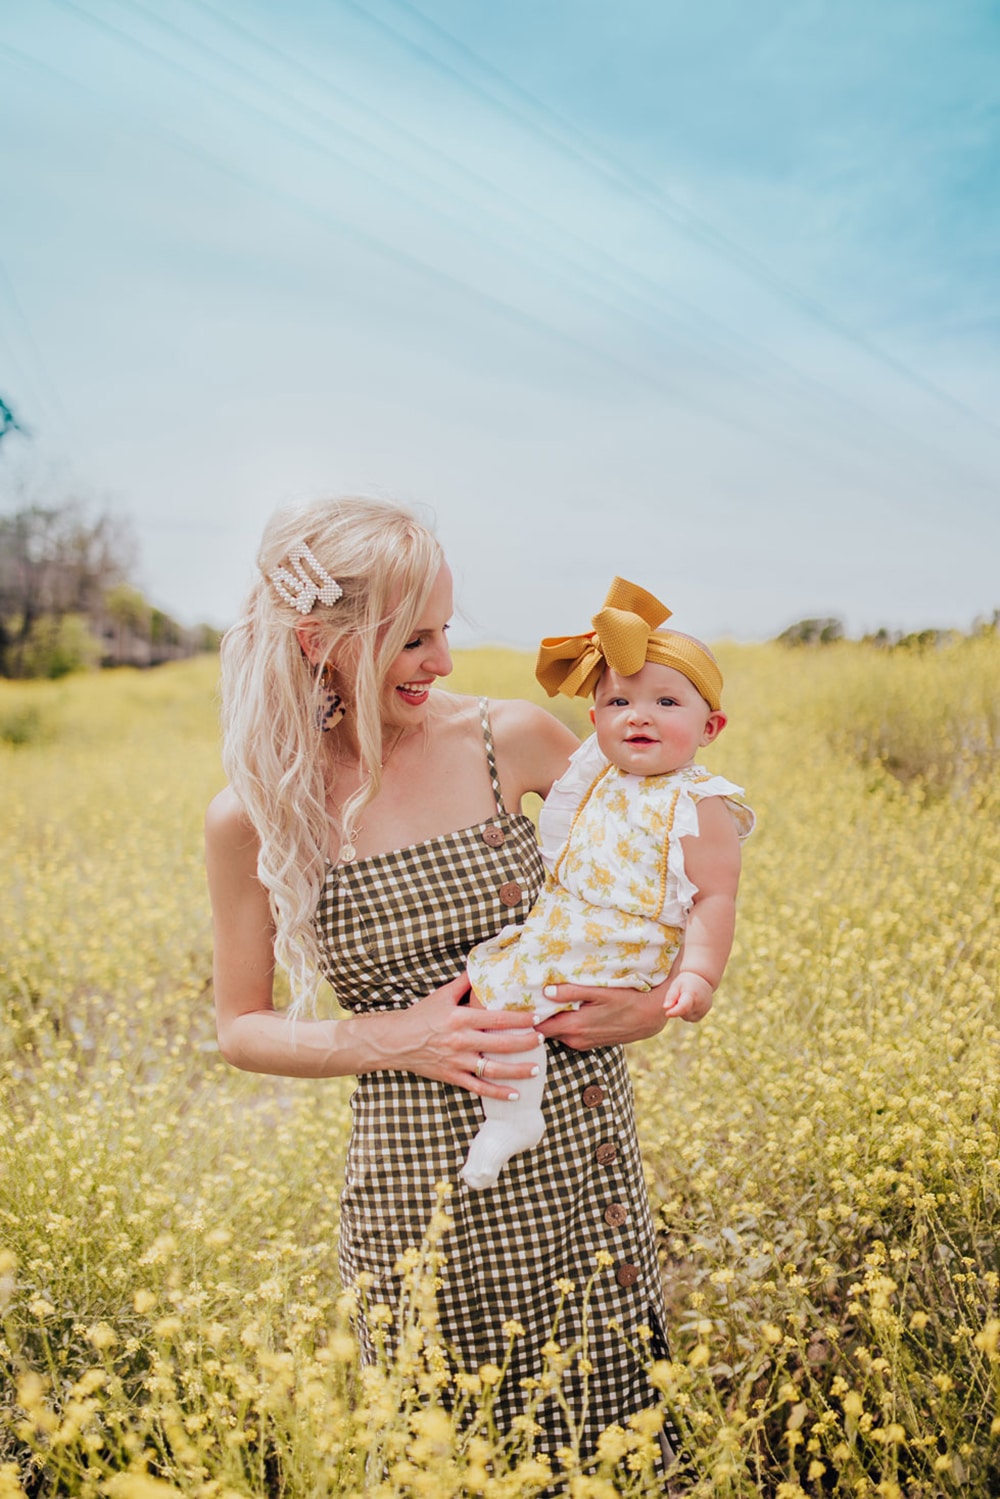 family photo ideas - mommy and me photography tips and locations - open field with flowers